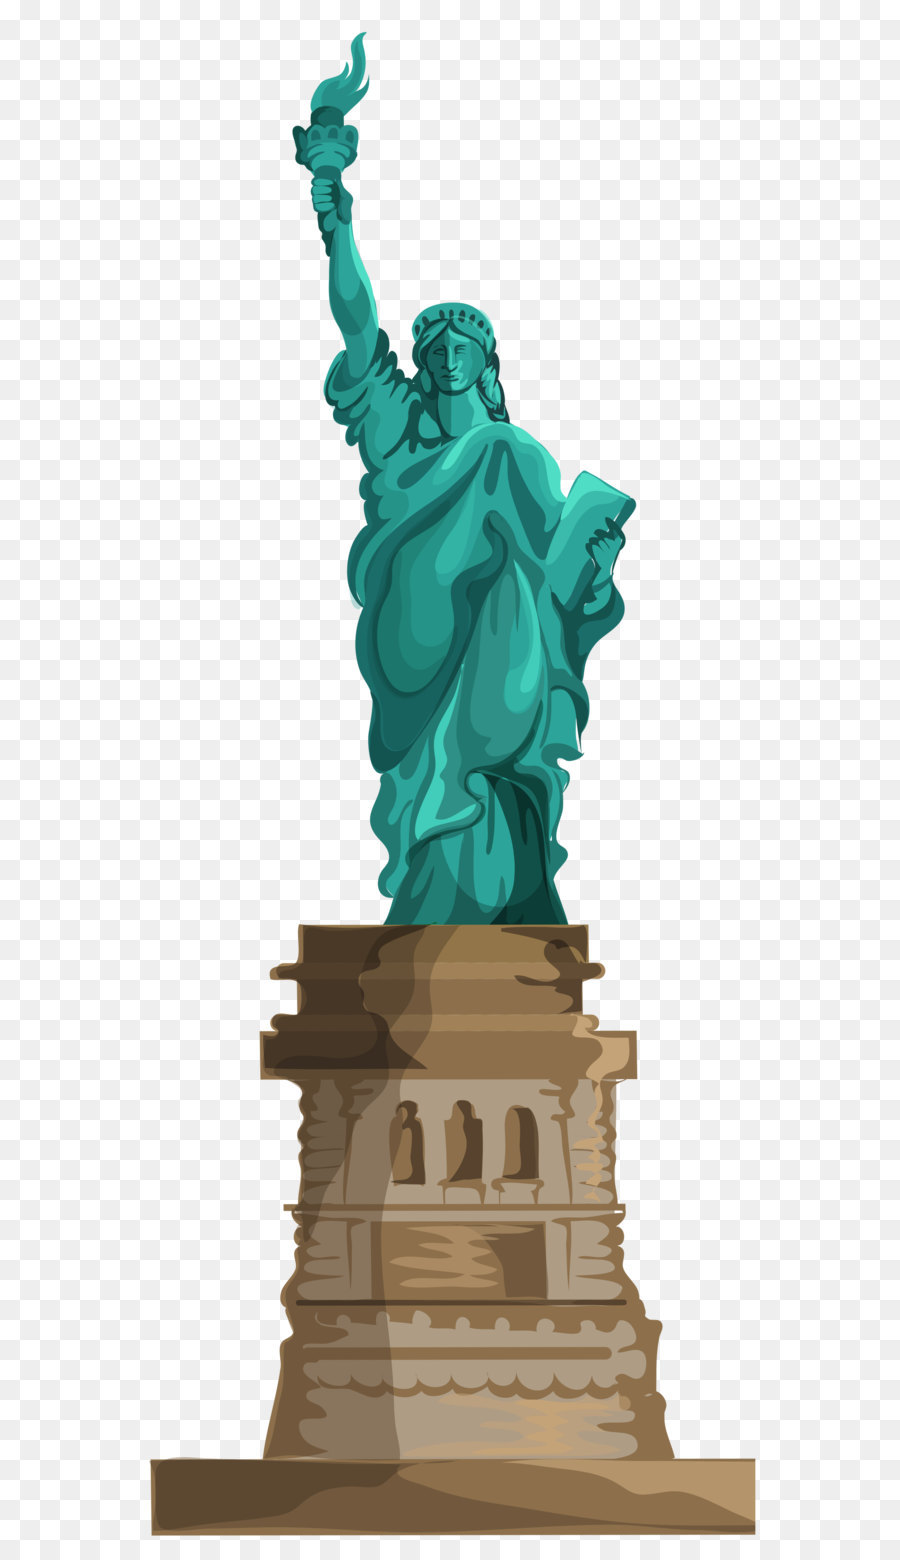 Statue of Liberty Battery Park Ellis Island New York Harbor American Museum of Immigration - Transparent Statue of Liberty PNG Clipart png download - 1720*4079 - Free Transparent Statue Of Liberty png Download.